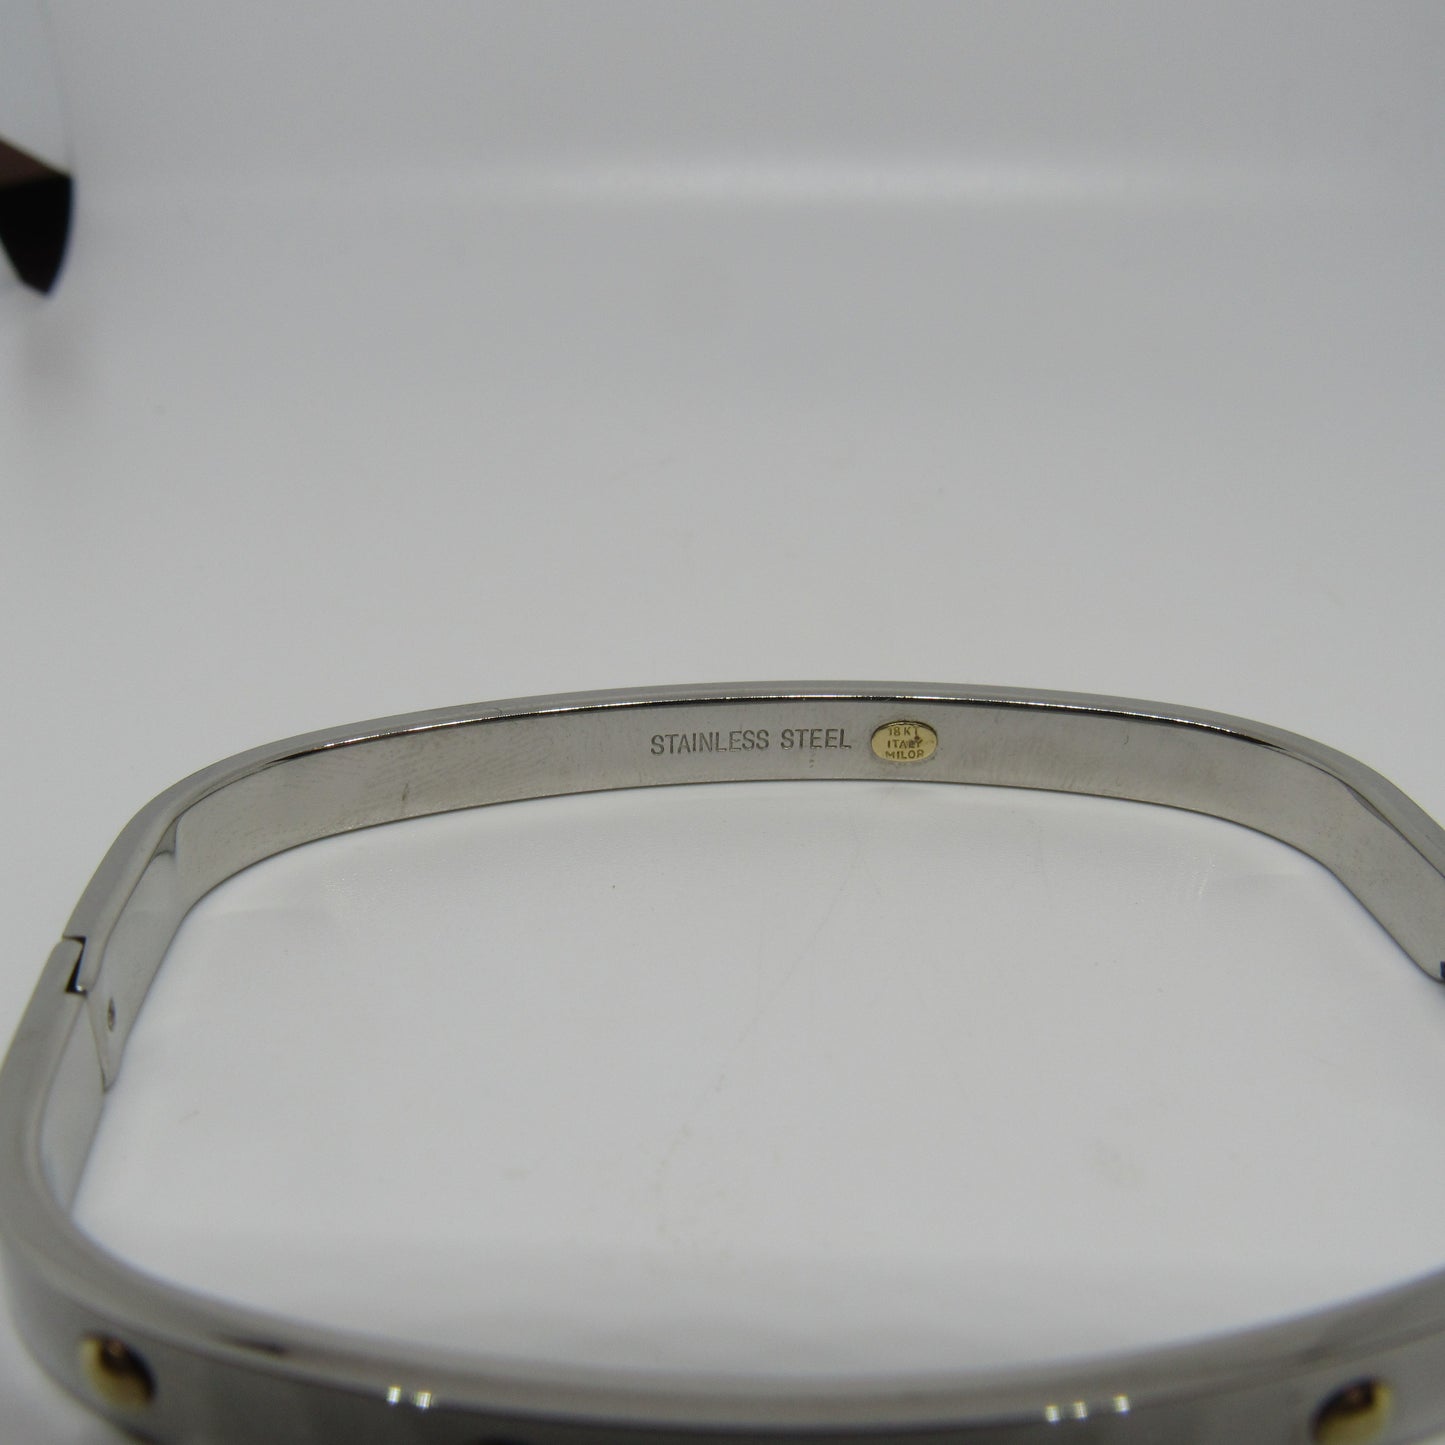 Milor Stainless Steel Bangle Bracelet 18K Yellow Gold Accents Italy Hinged - 7 in